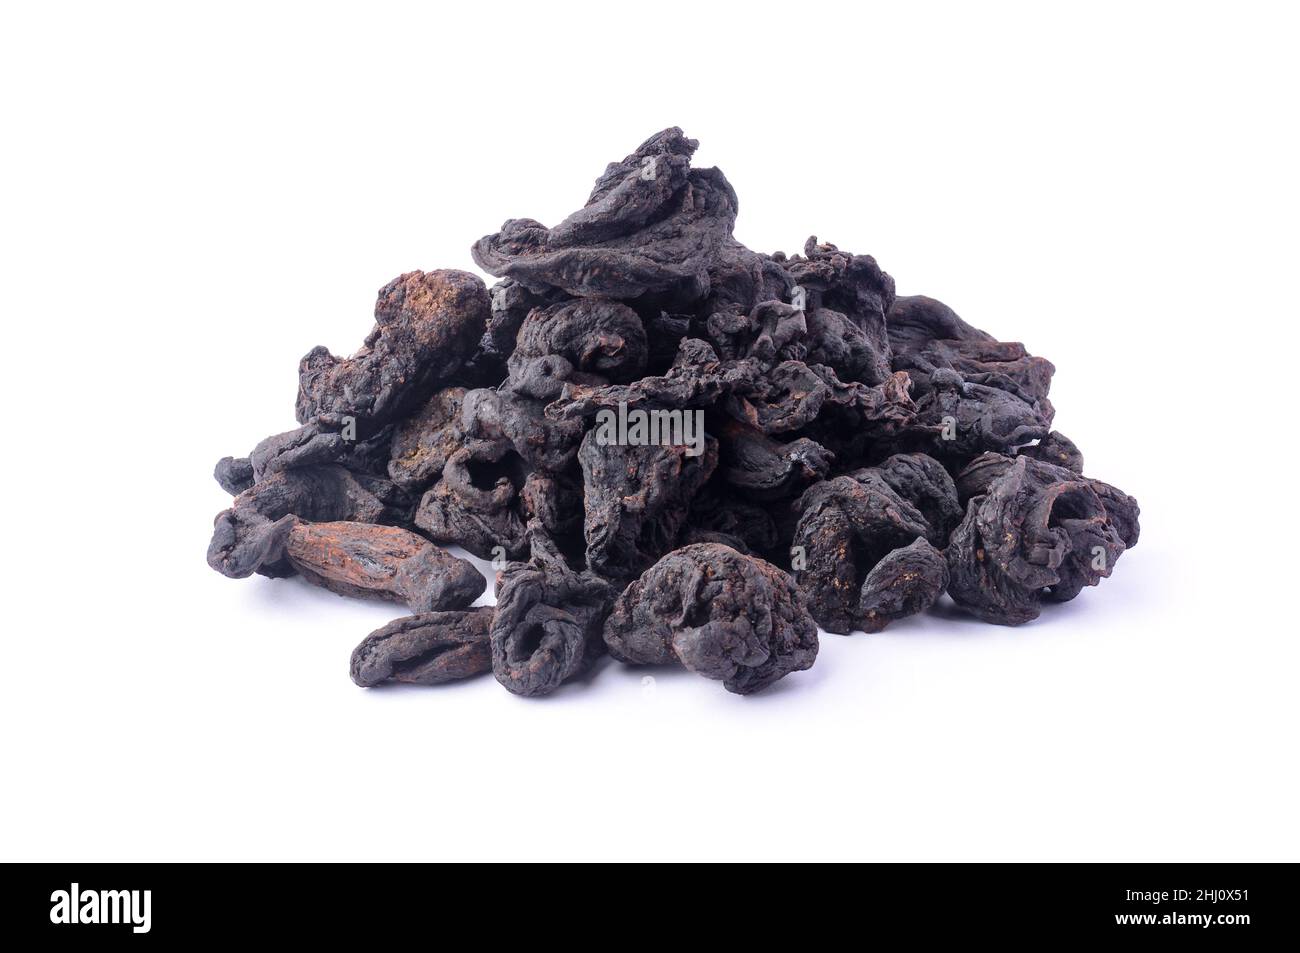 pile of sun dried garcinia fruits, black shriveled flavoring herb native to south asia, also known as brindle berry, goraka or malabar tamarind, isola Stock Photo